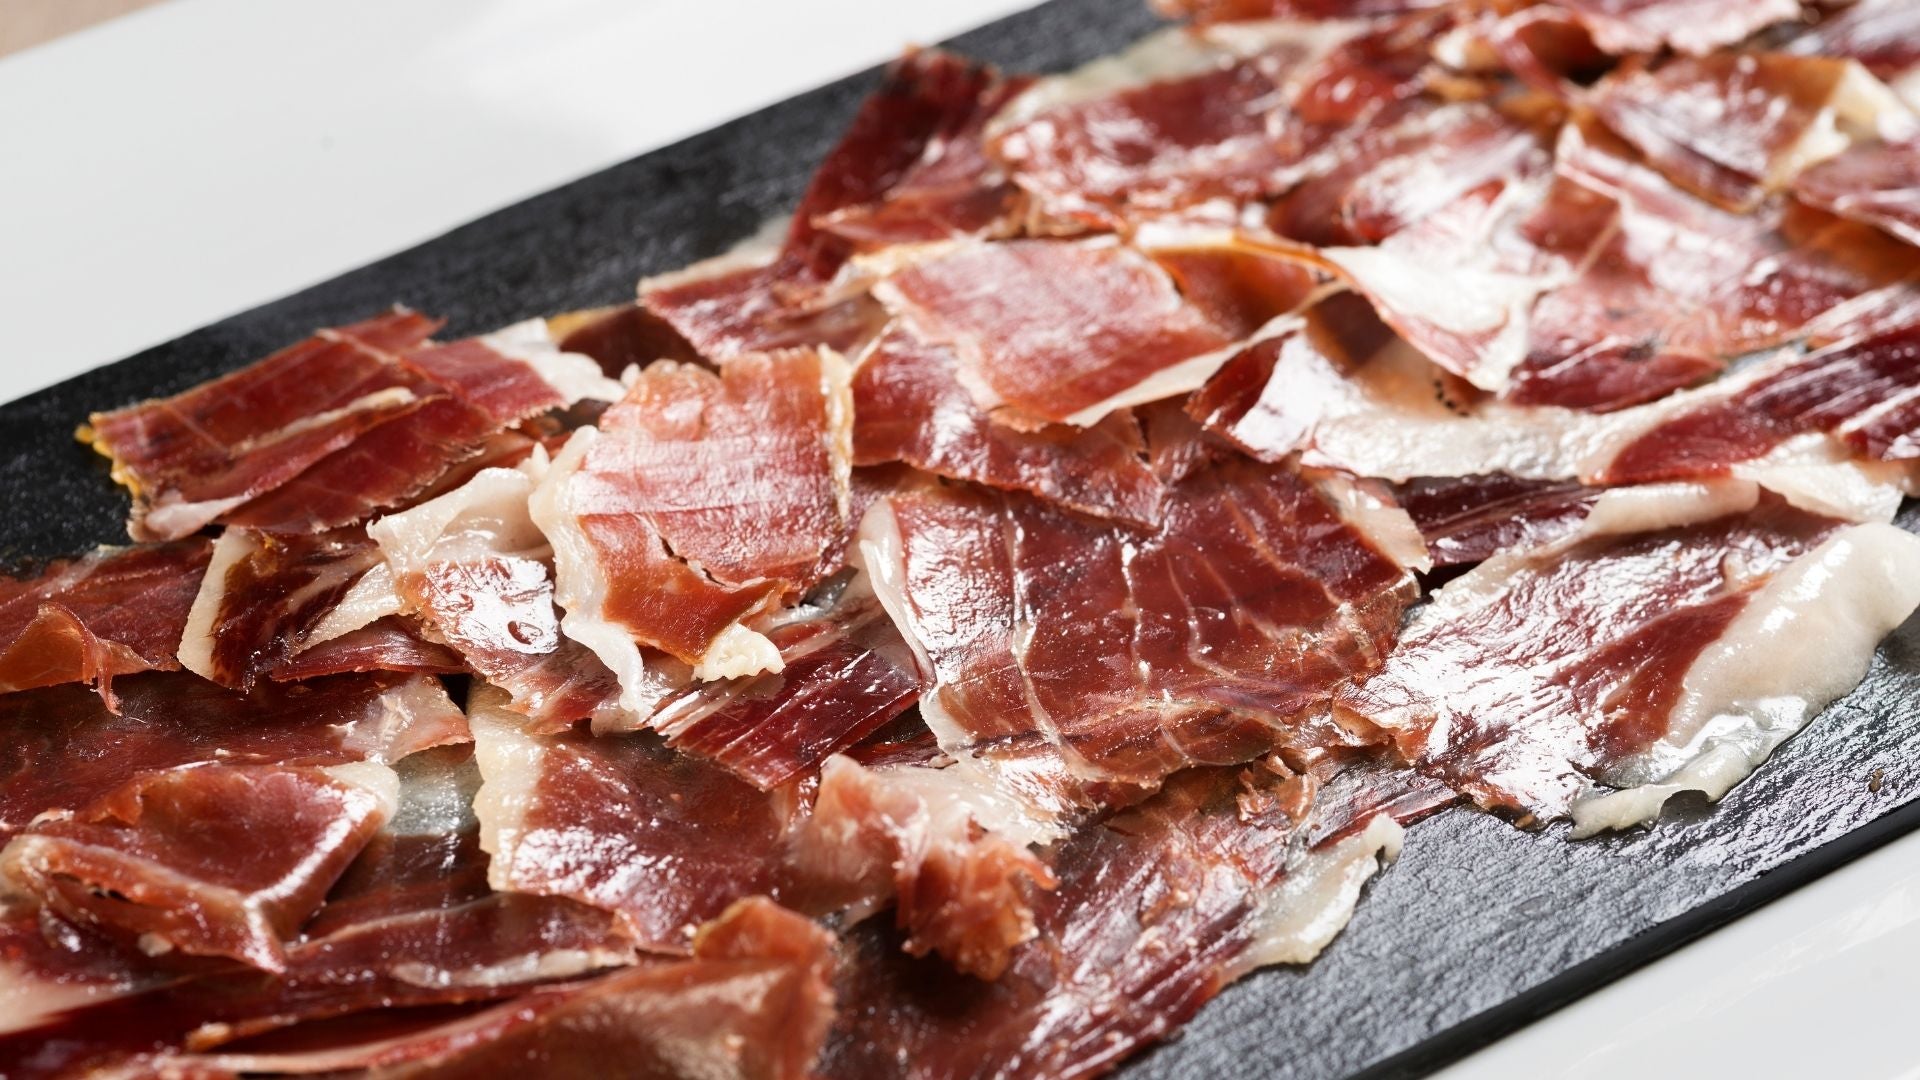 Mini-guide to choose the right Jamón. Pata Negra, Ibérico or